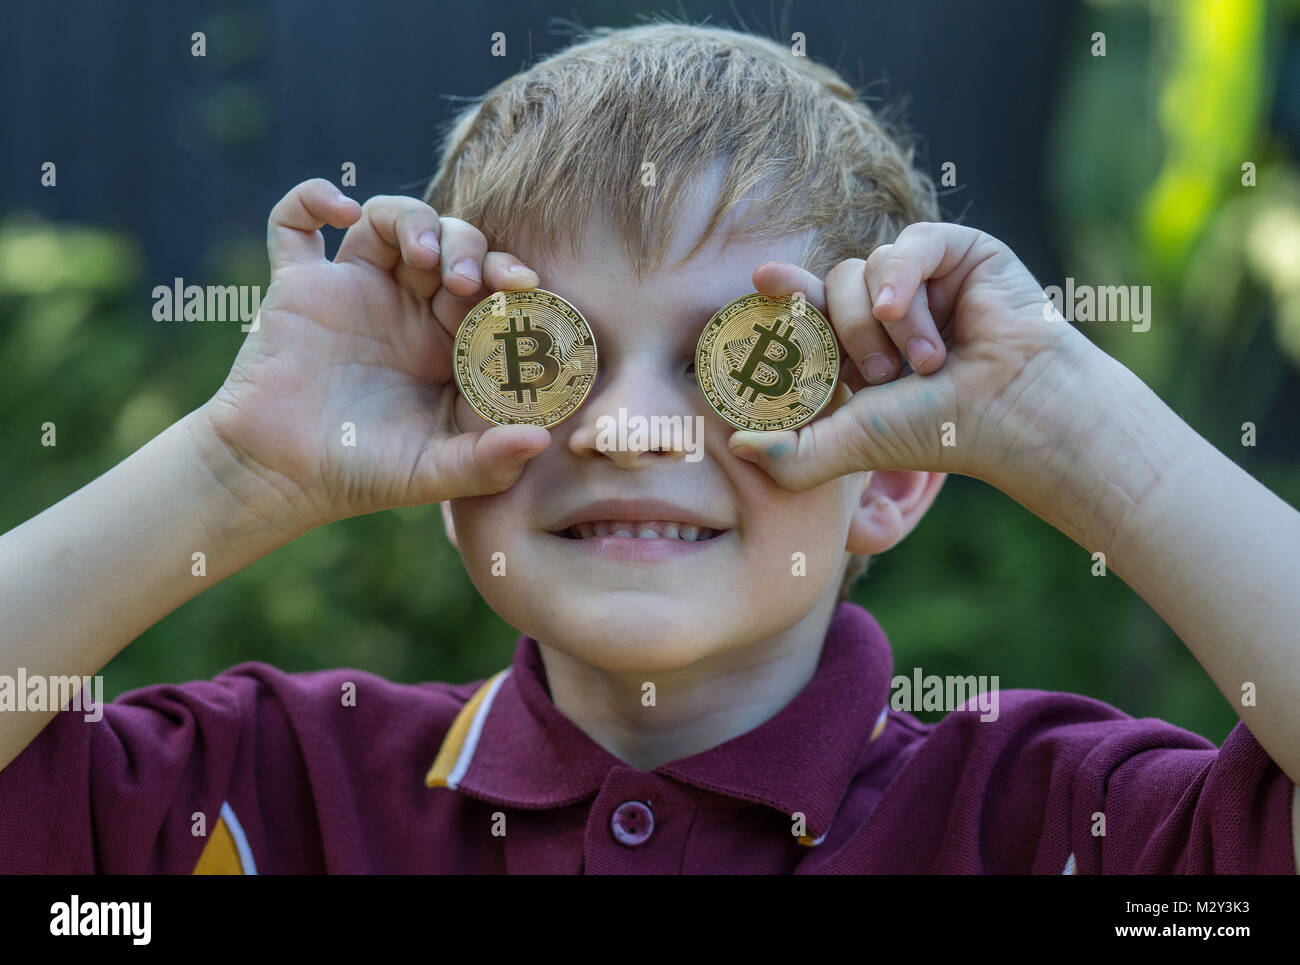 Child holding Bitcoins over his eyes Stock Photo